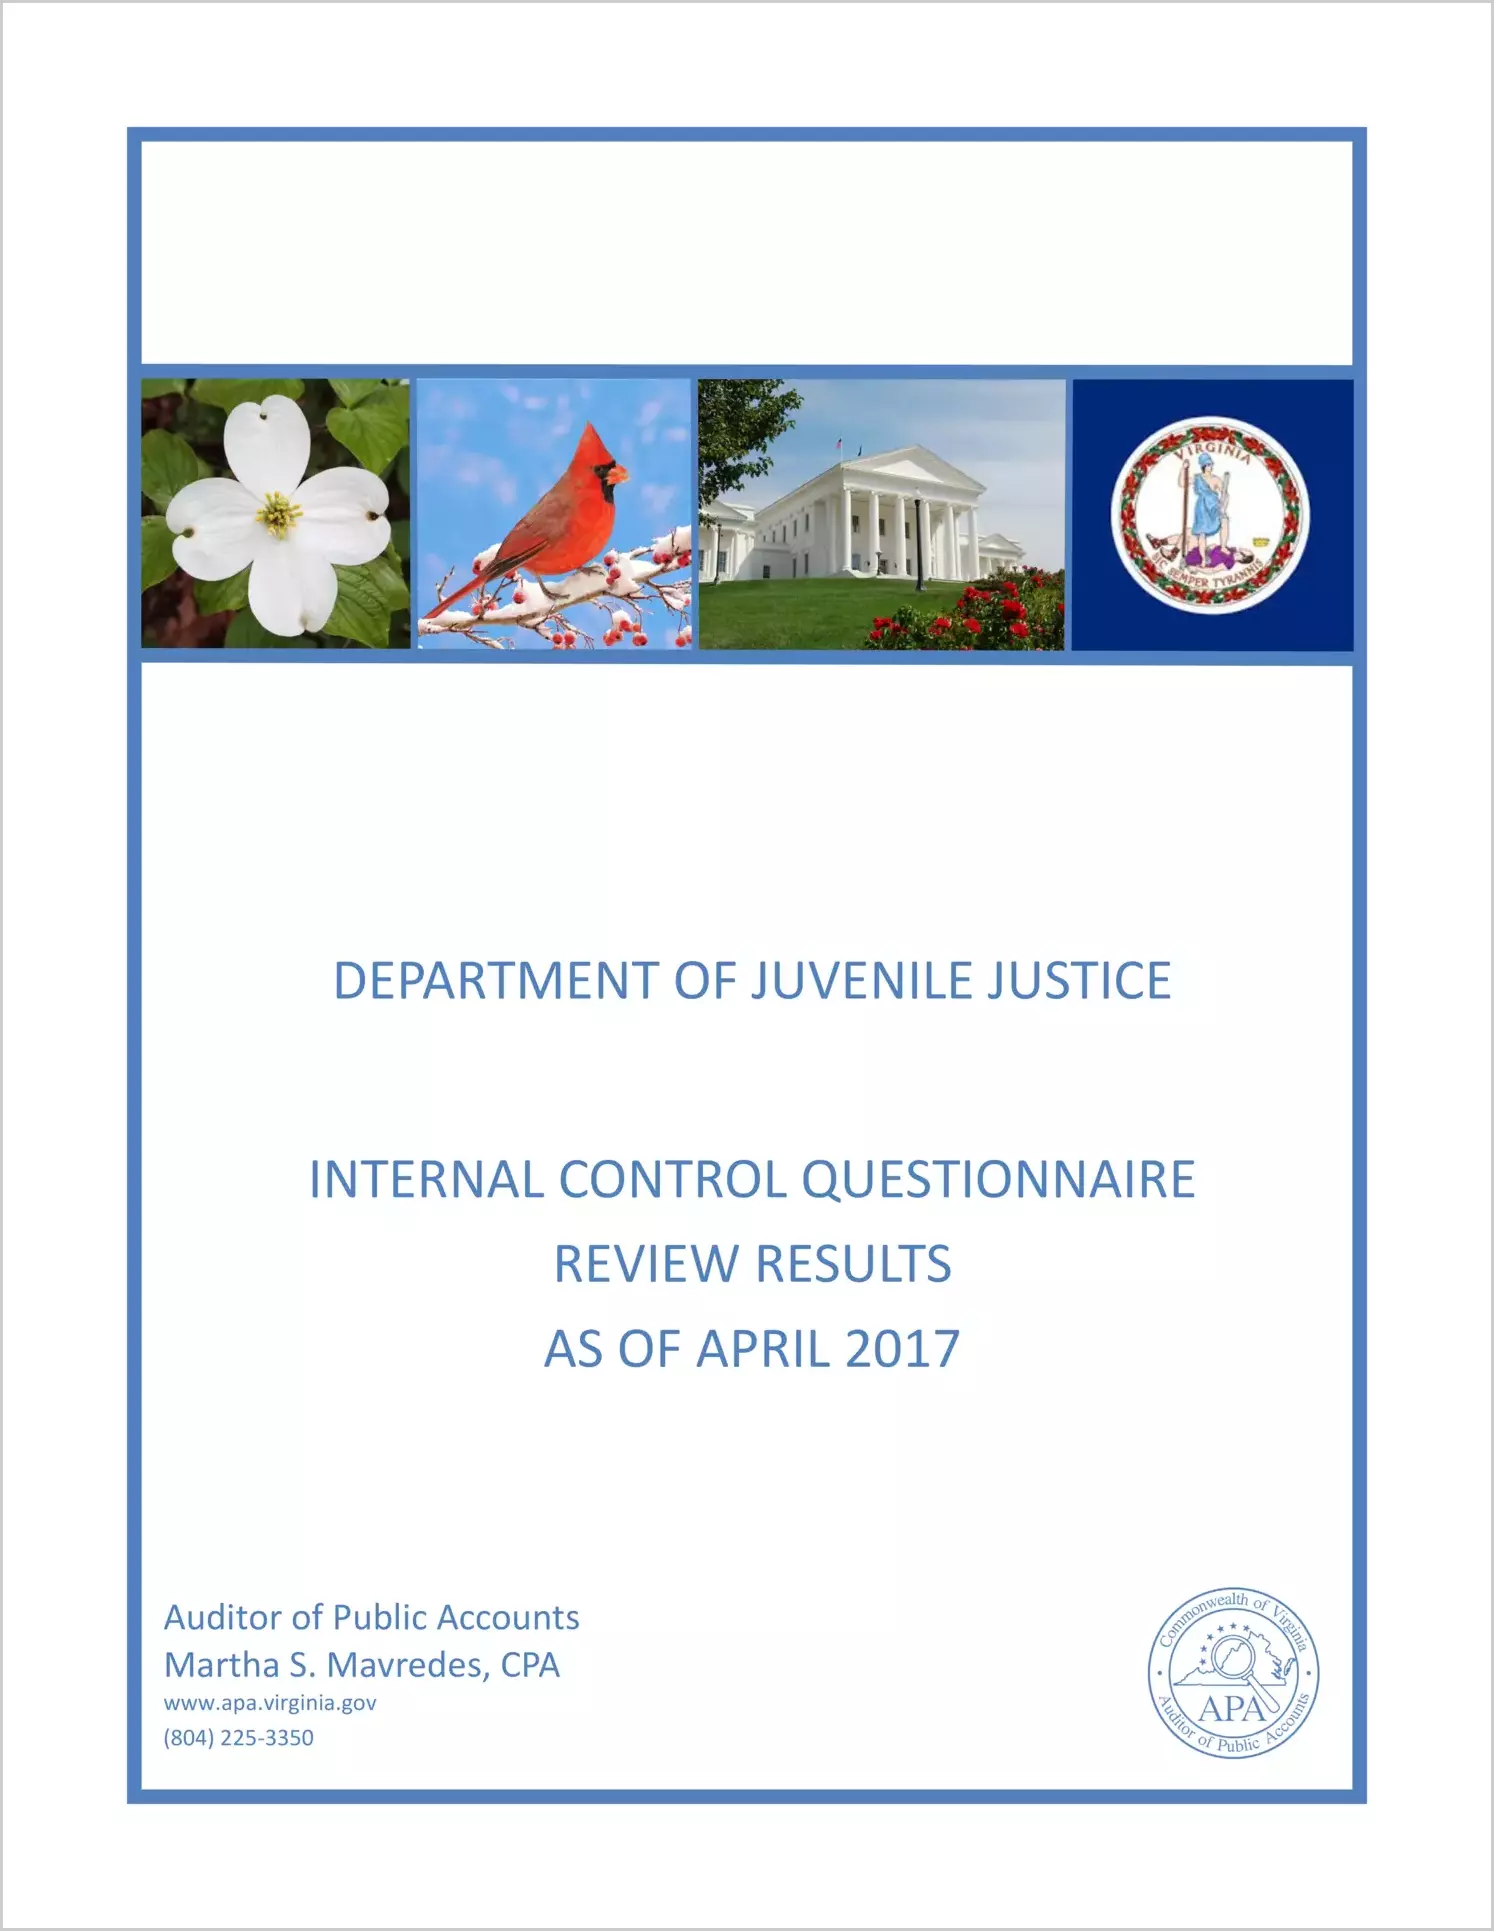 Department of Juvenile Justice Internal Control Questionnaire Review Results as of April 2017